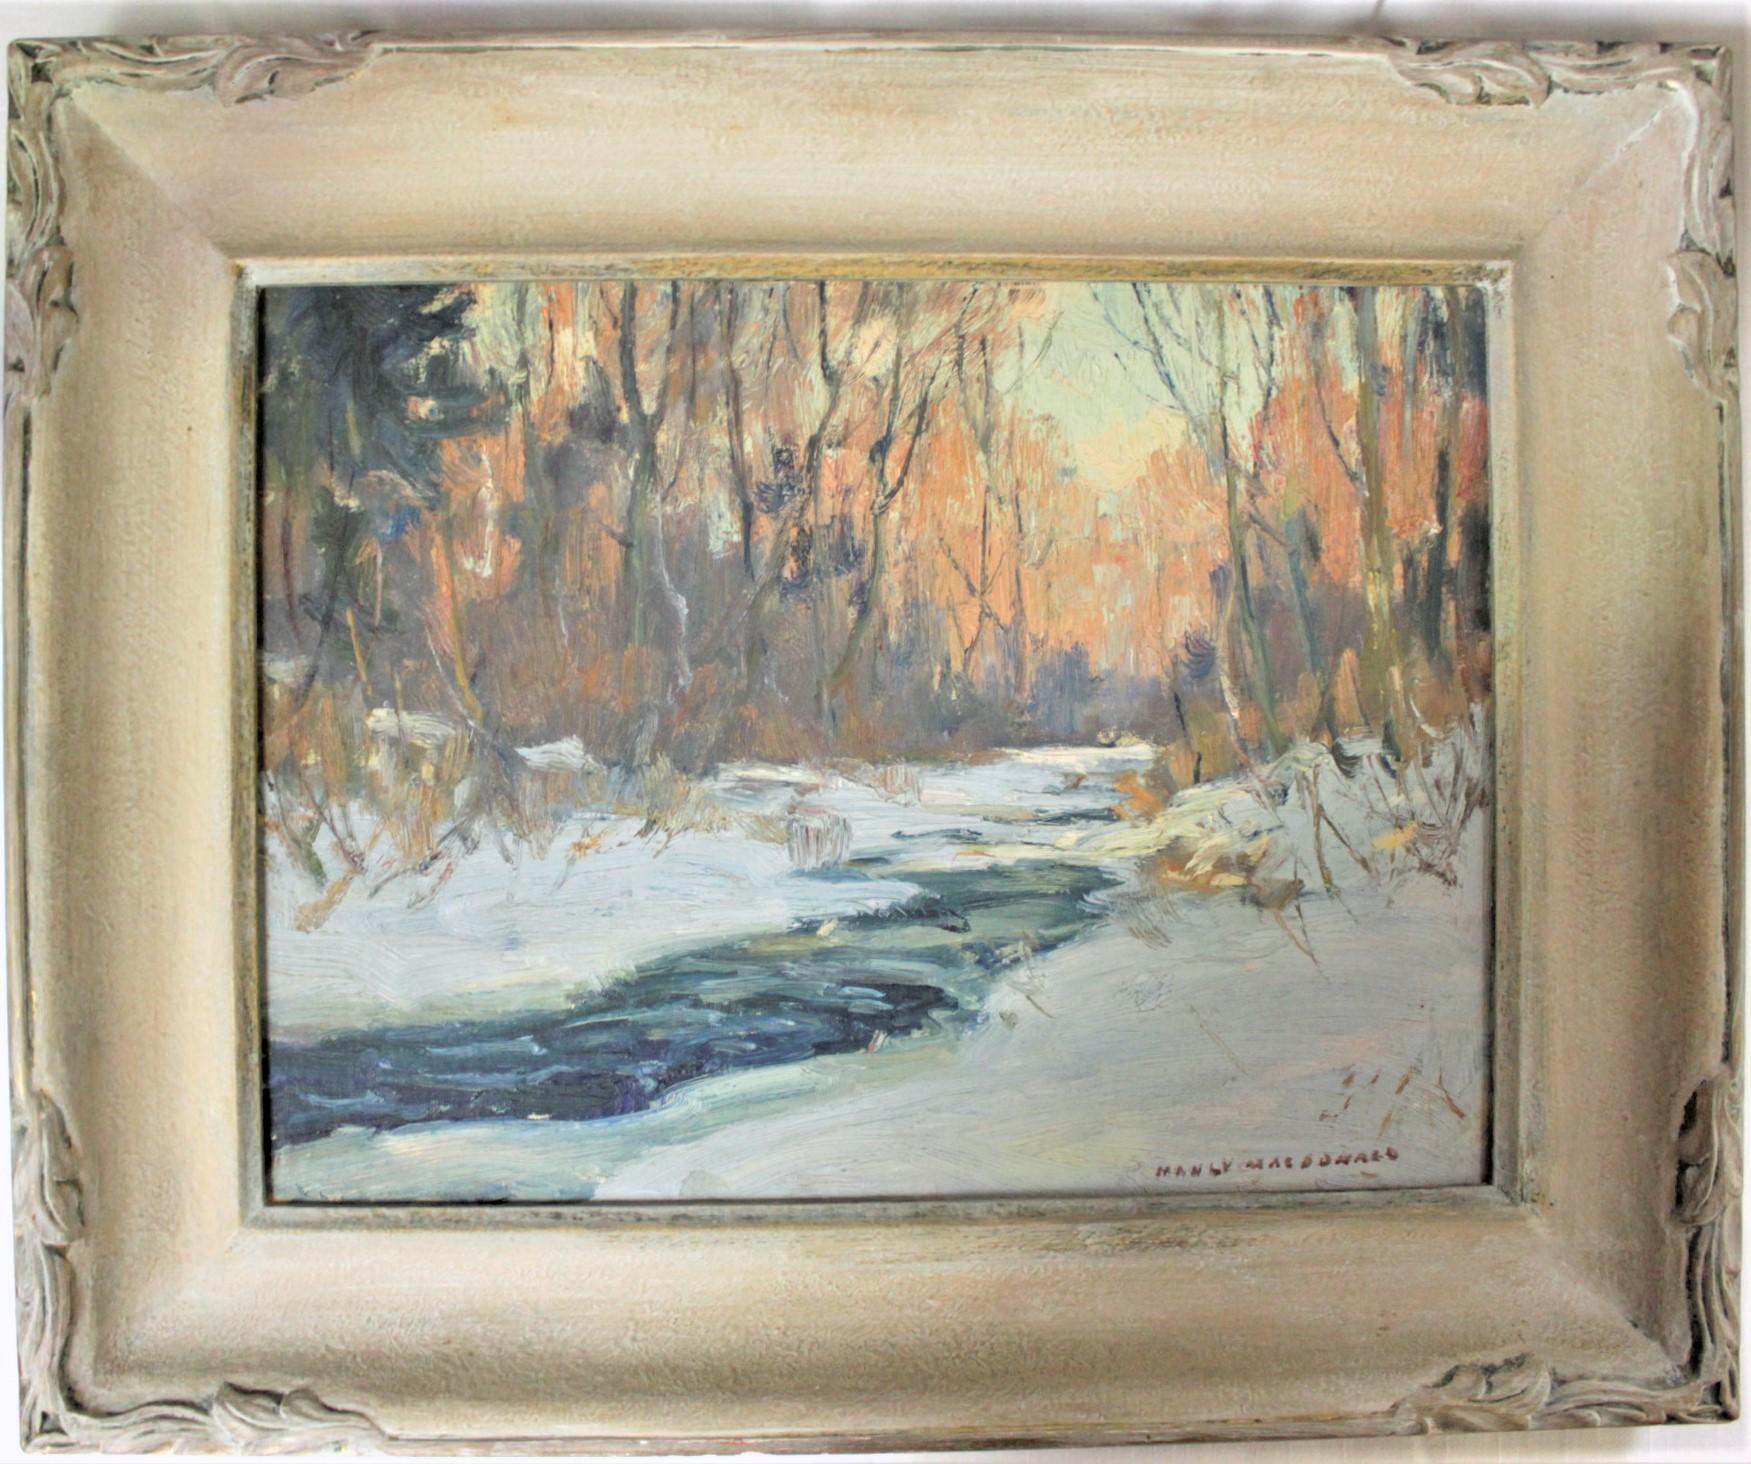 This original painting was done by the Canadian artist, Manly E. MacDonald in circa 1960 in his semi-impressionistic style. The painting is done on canvas artist's board and is a Canadian winter landscape scene of trees and a stream. The painting is